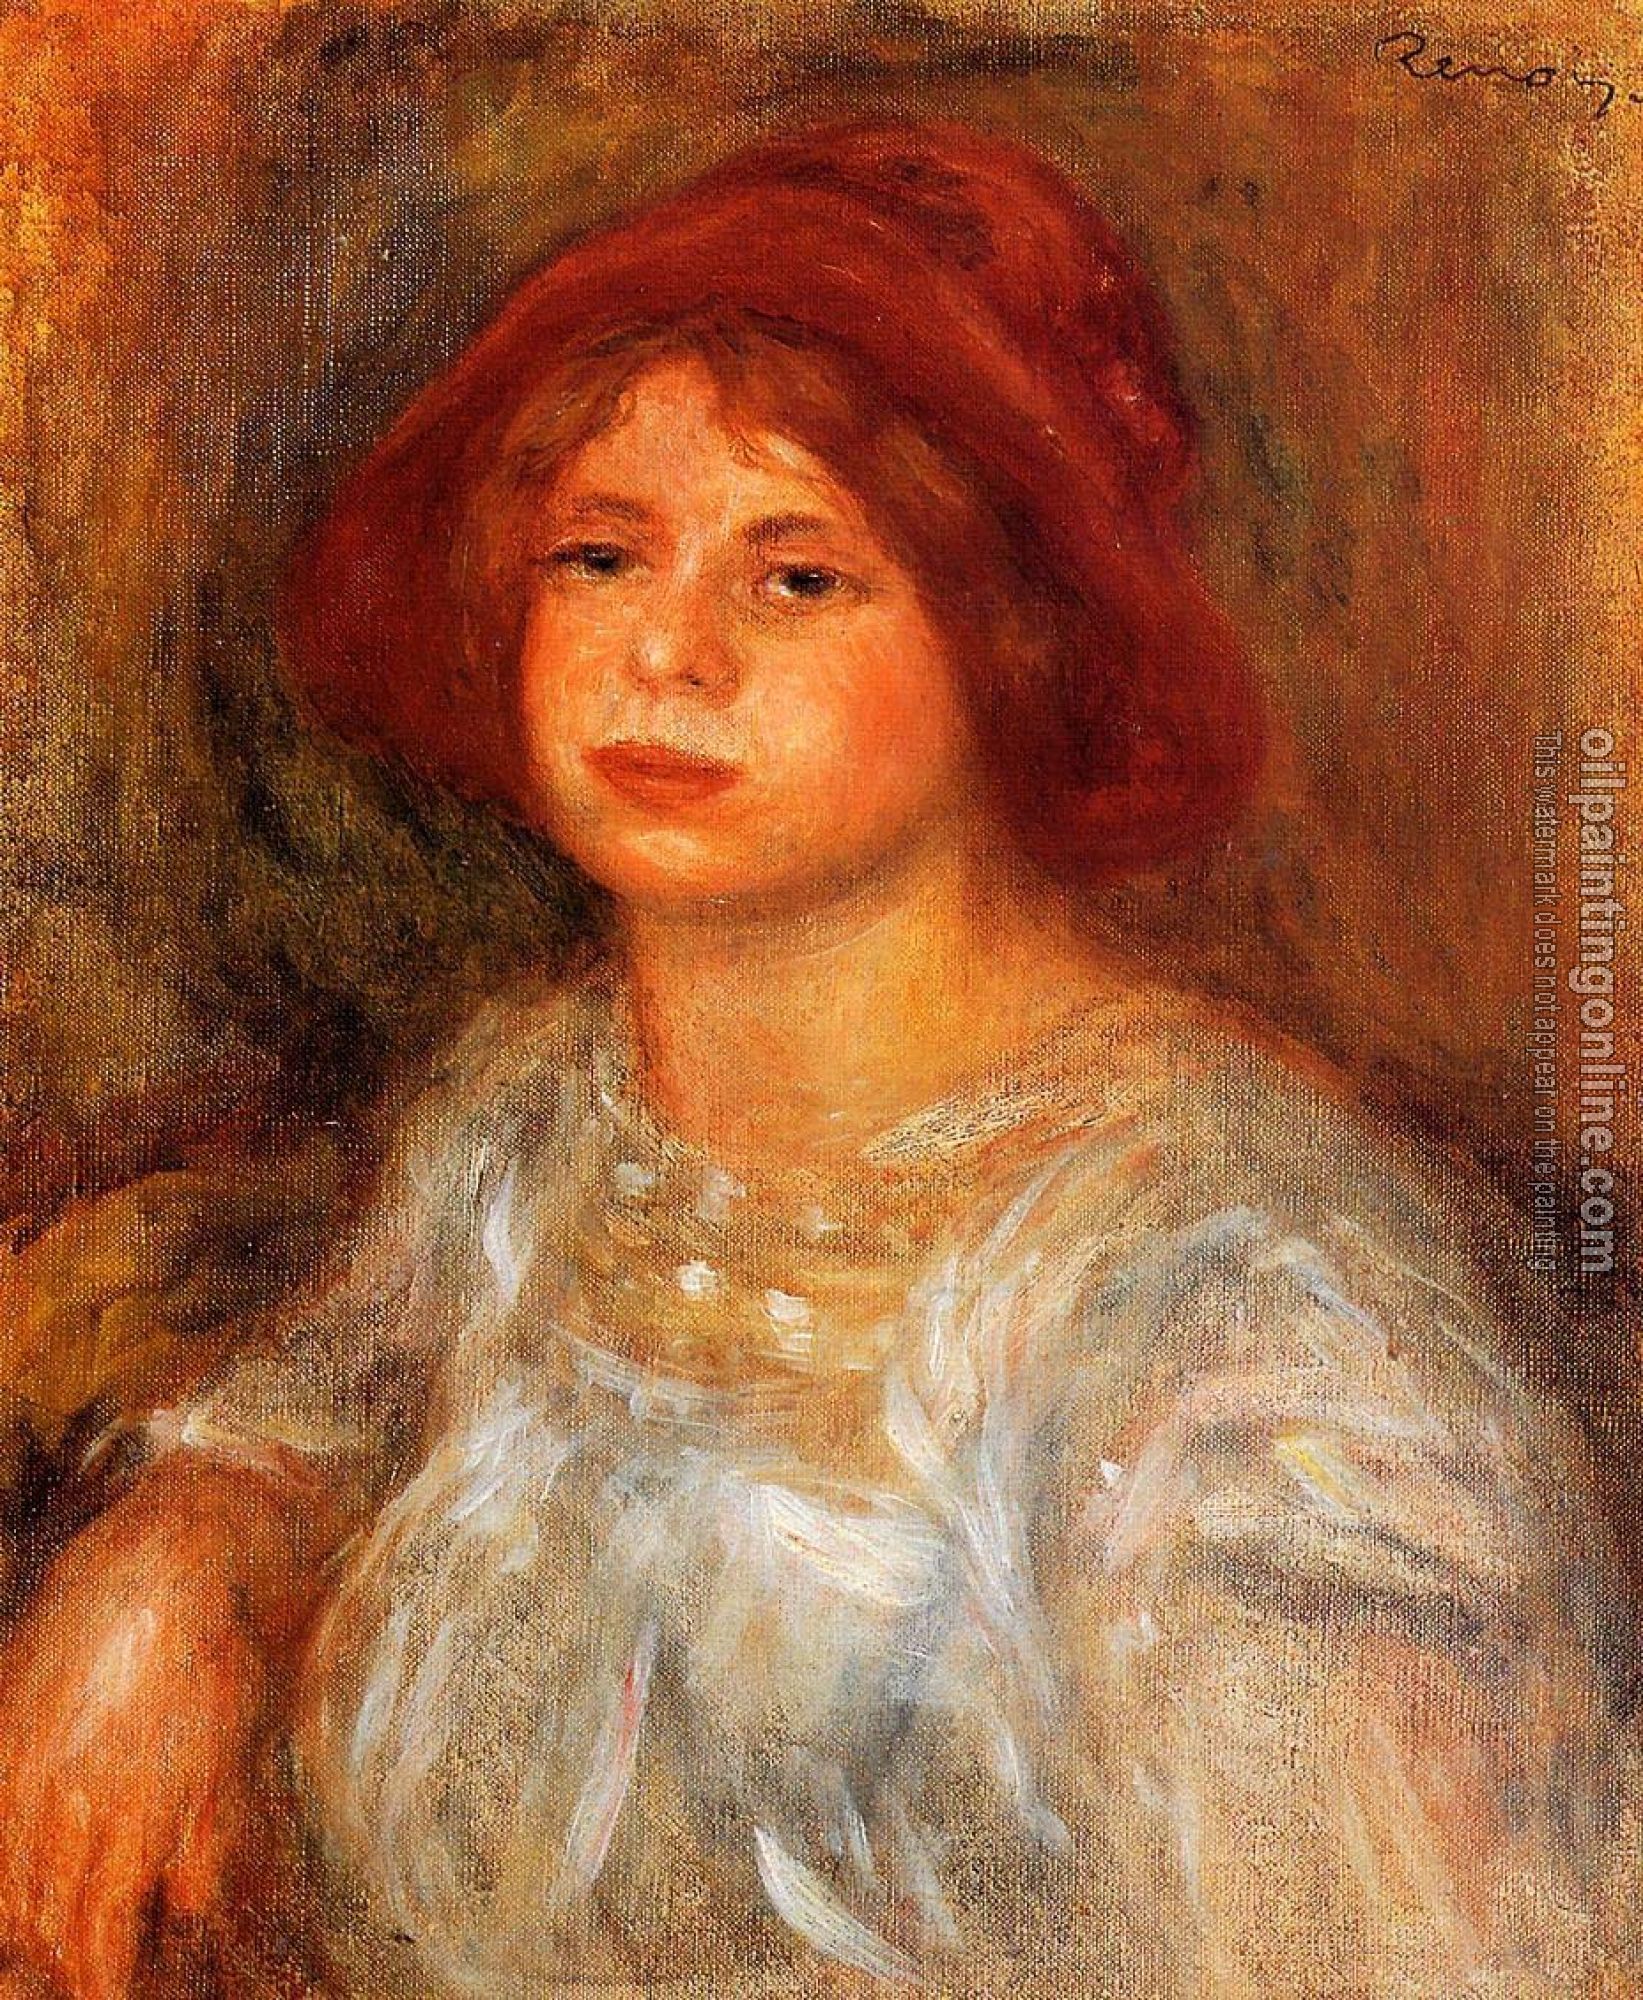 Renoir, Pierre Auguste - Young Girl Wearing a Red Hat